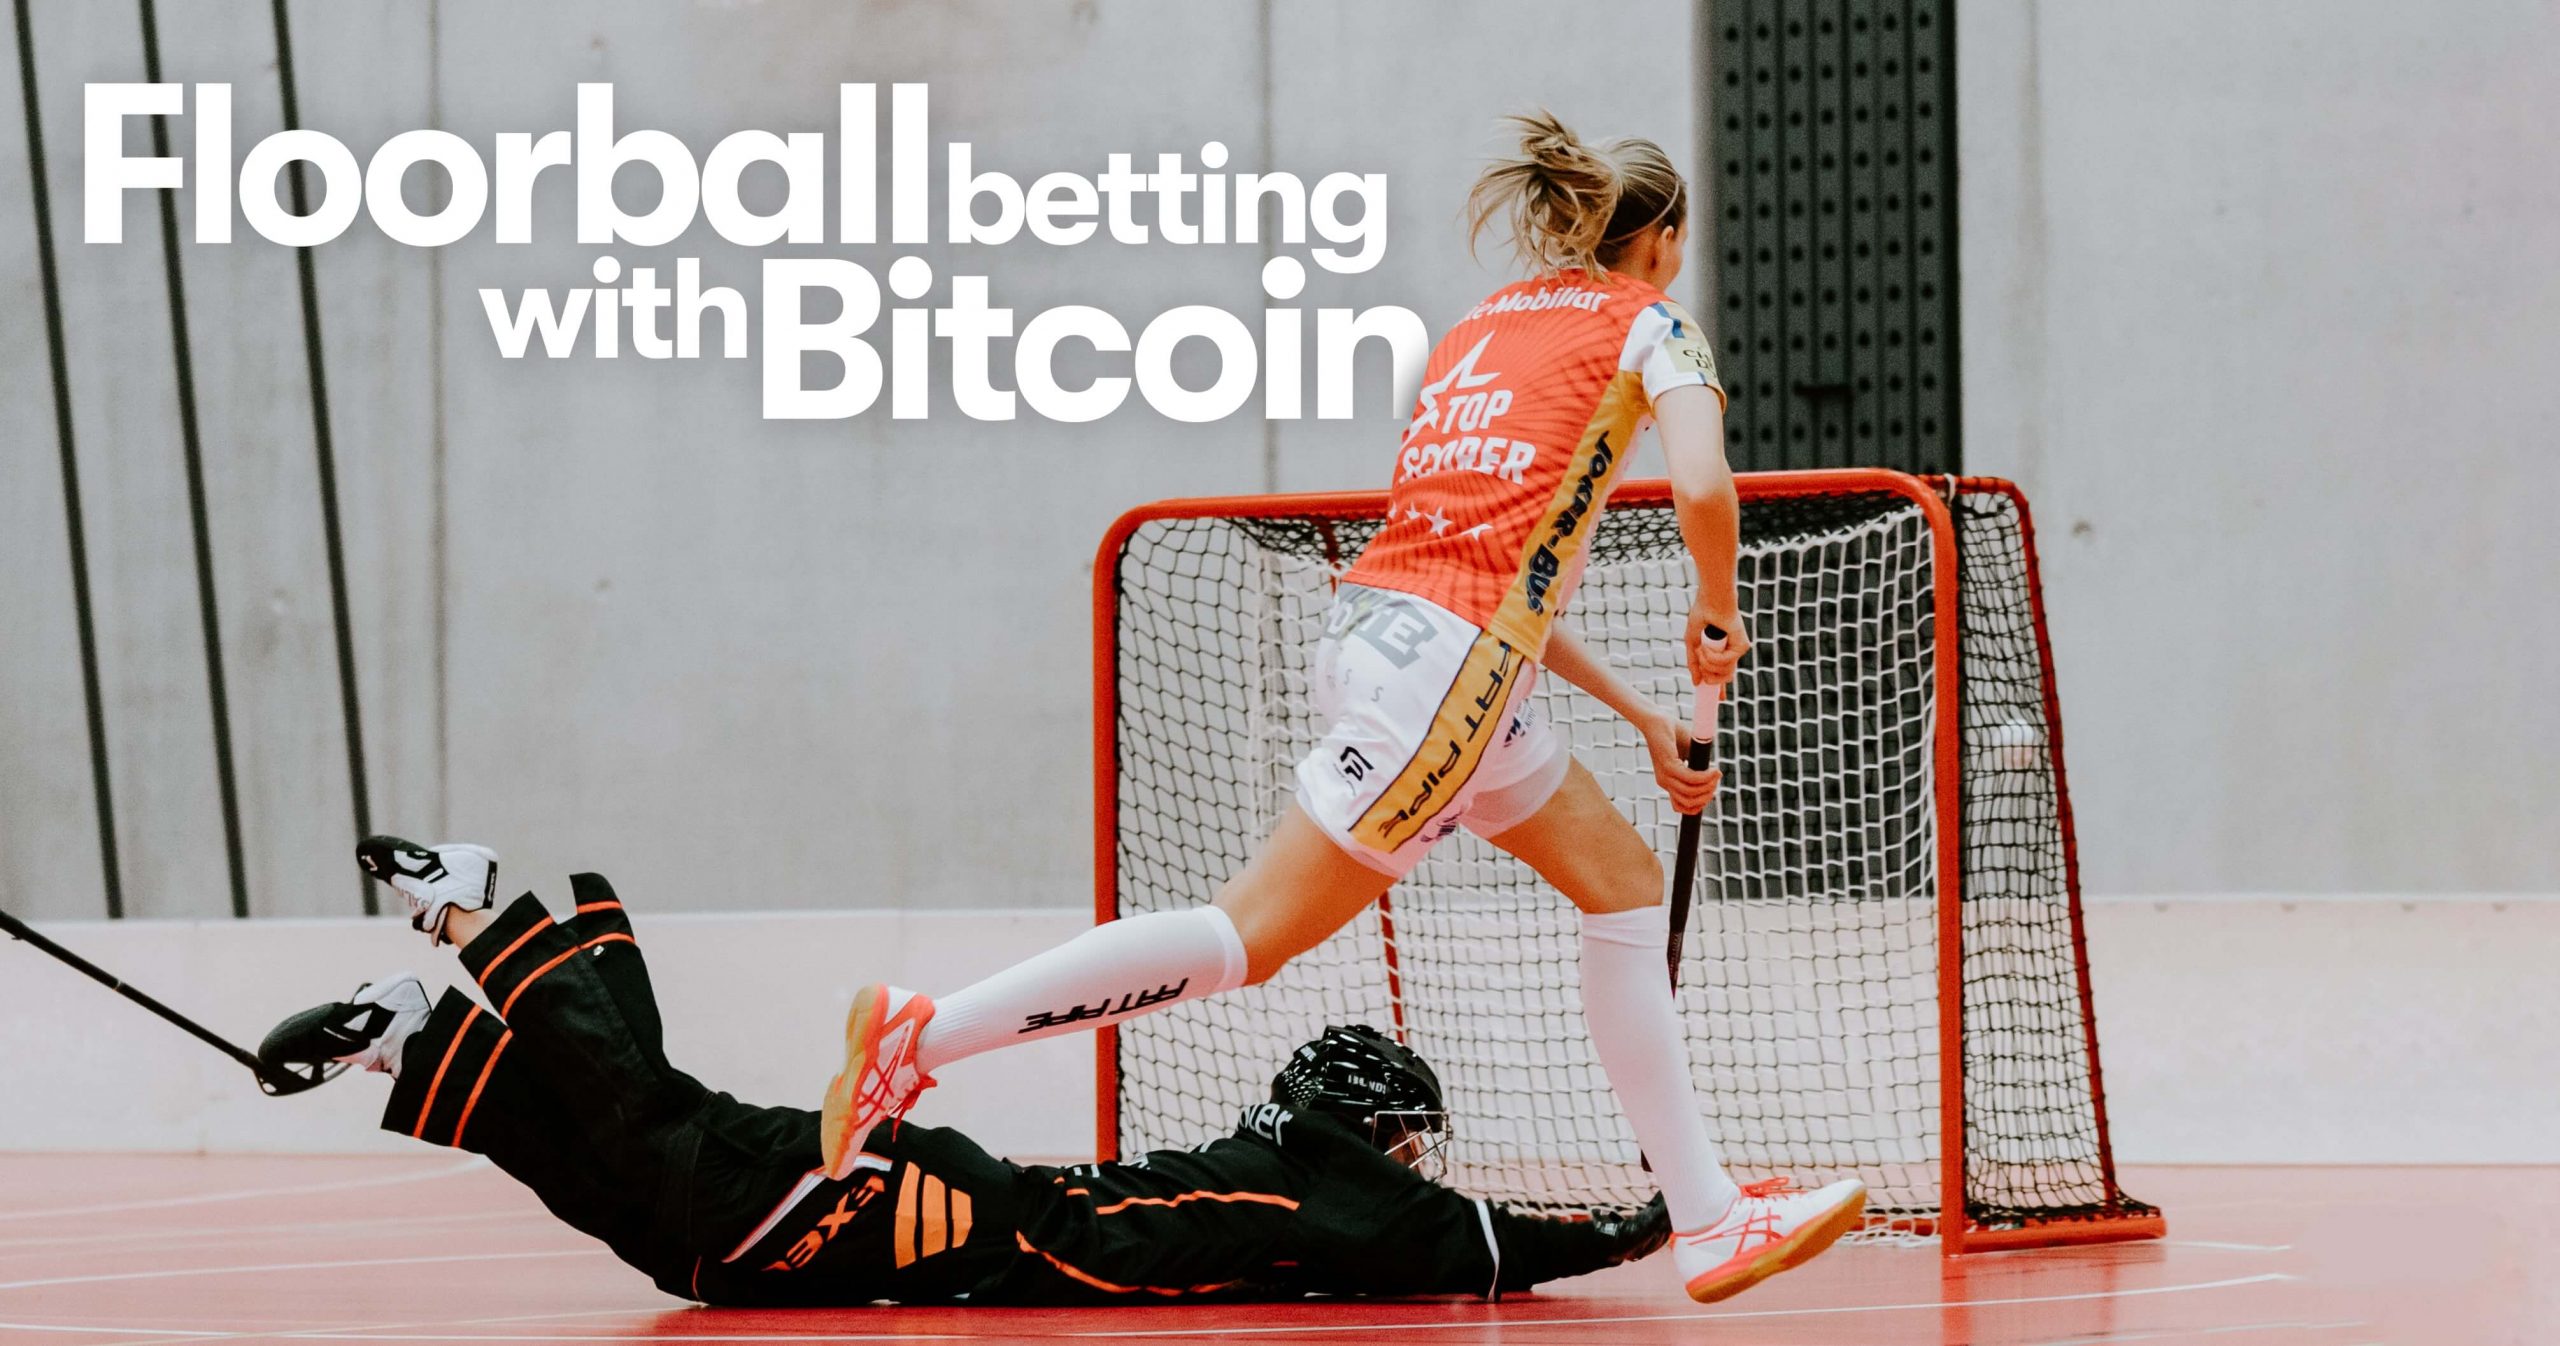 Floorball betting with Bitcoin